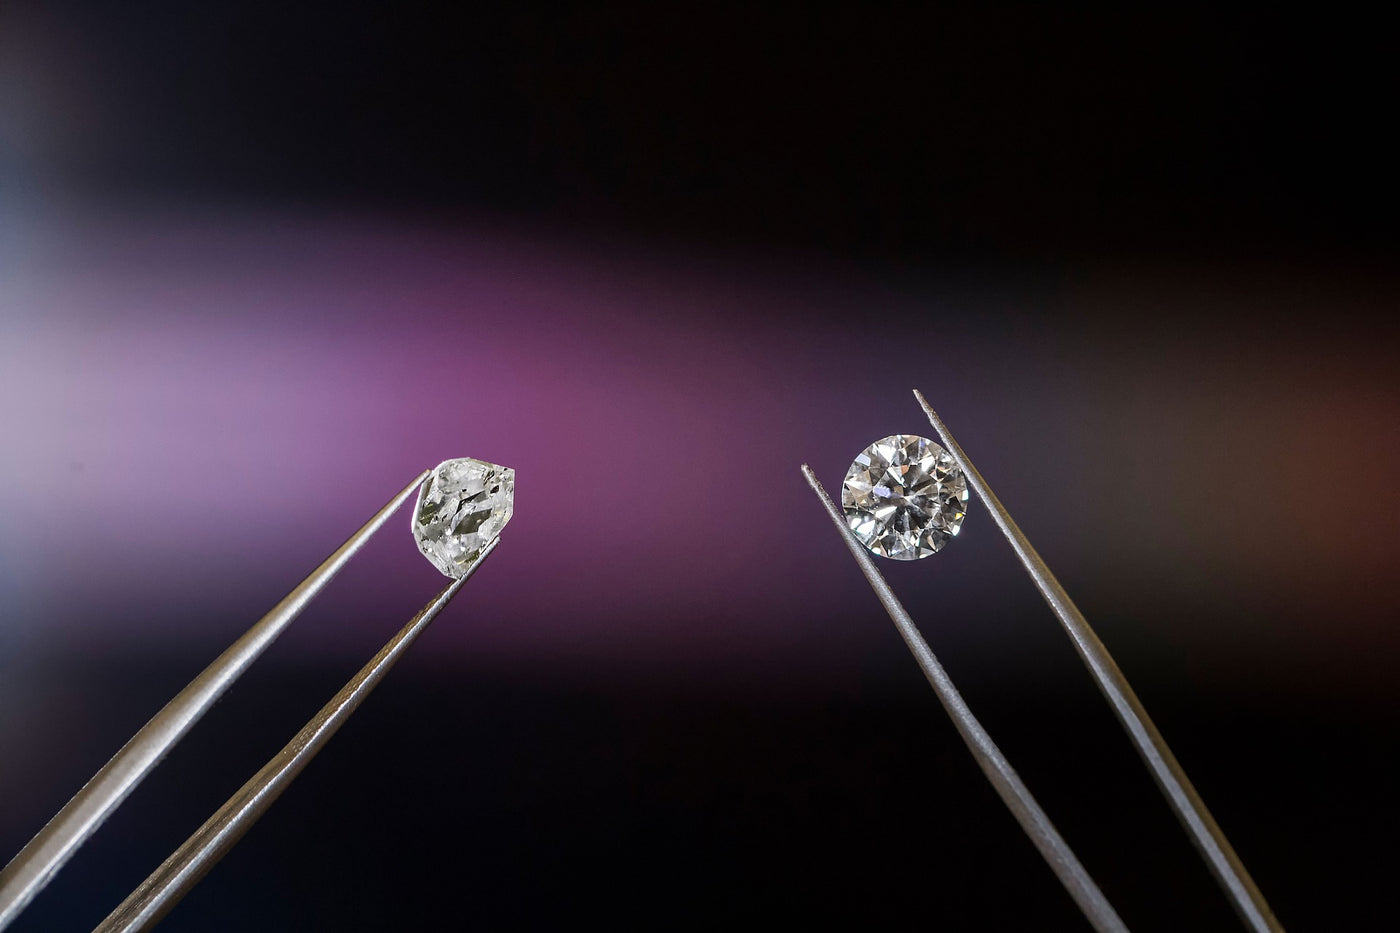 Two different diamonds being held up with jewelry tweezers showing CVD vs. HPHT vs. Mined Diamonds.